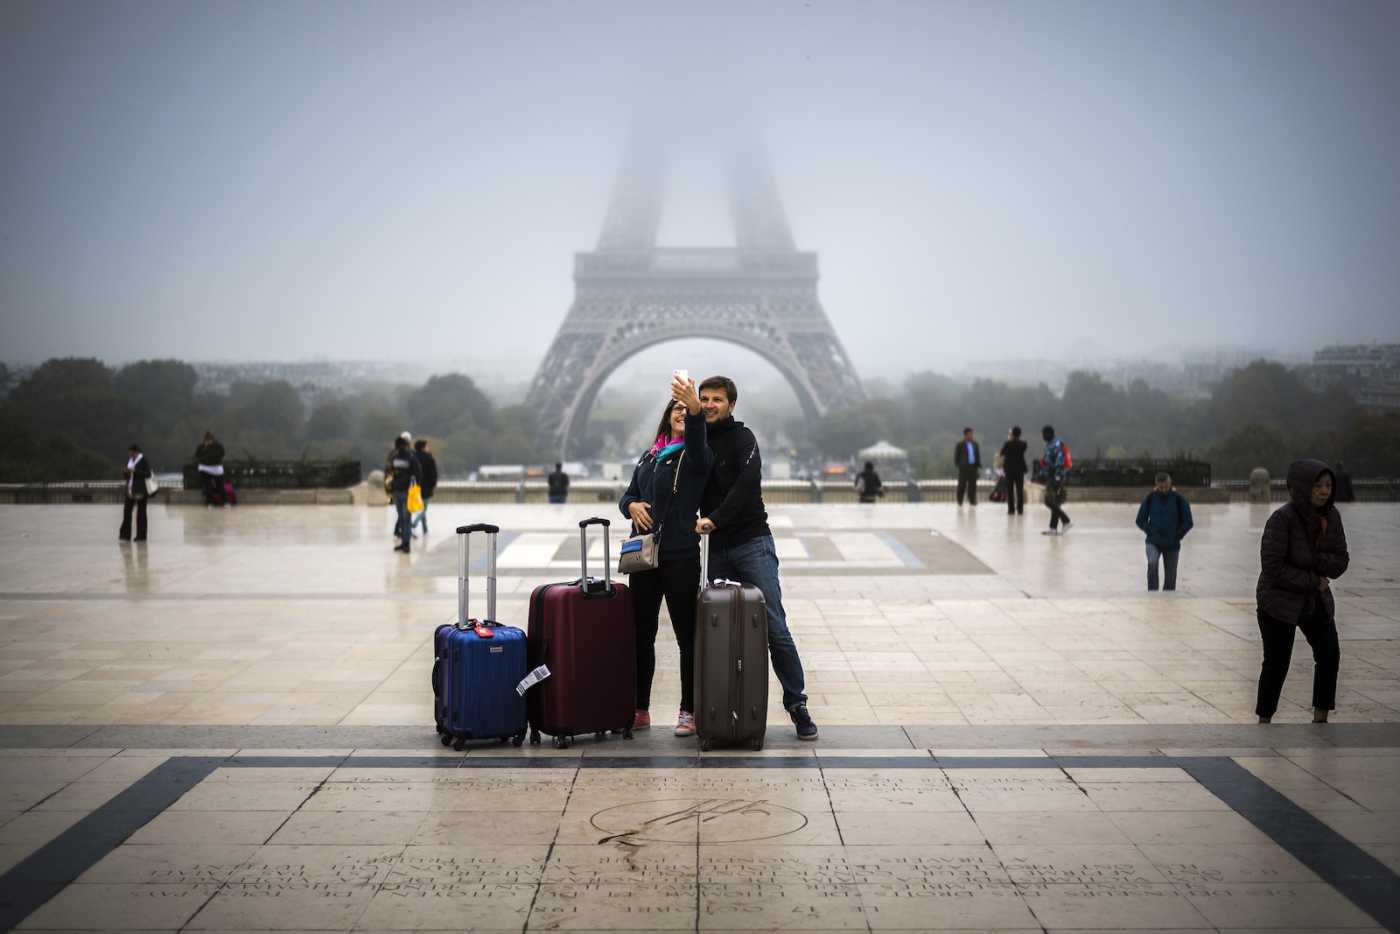 Extraction axe so much Paris after the attacks: Tourists still staying away | Middle East Eye